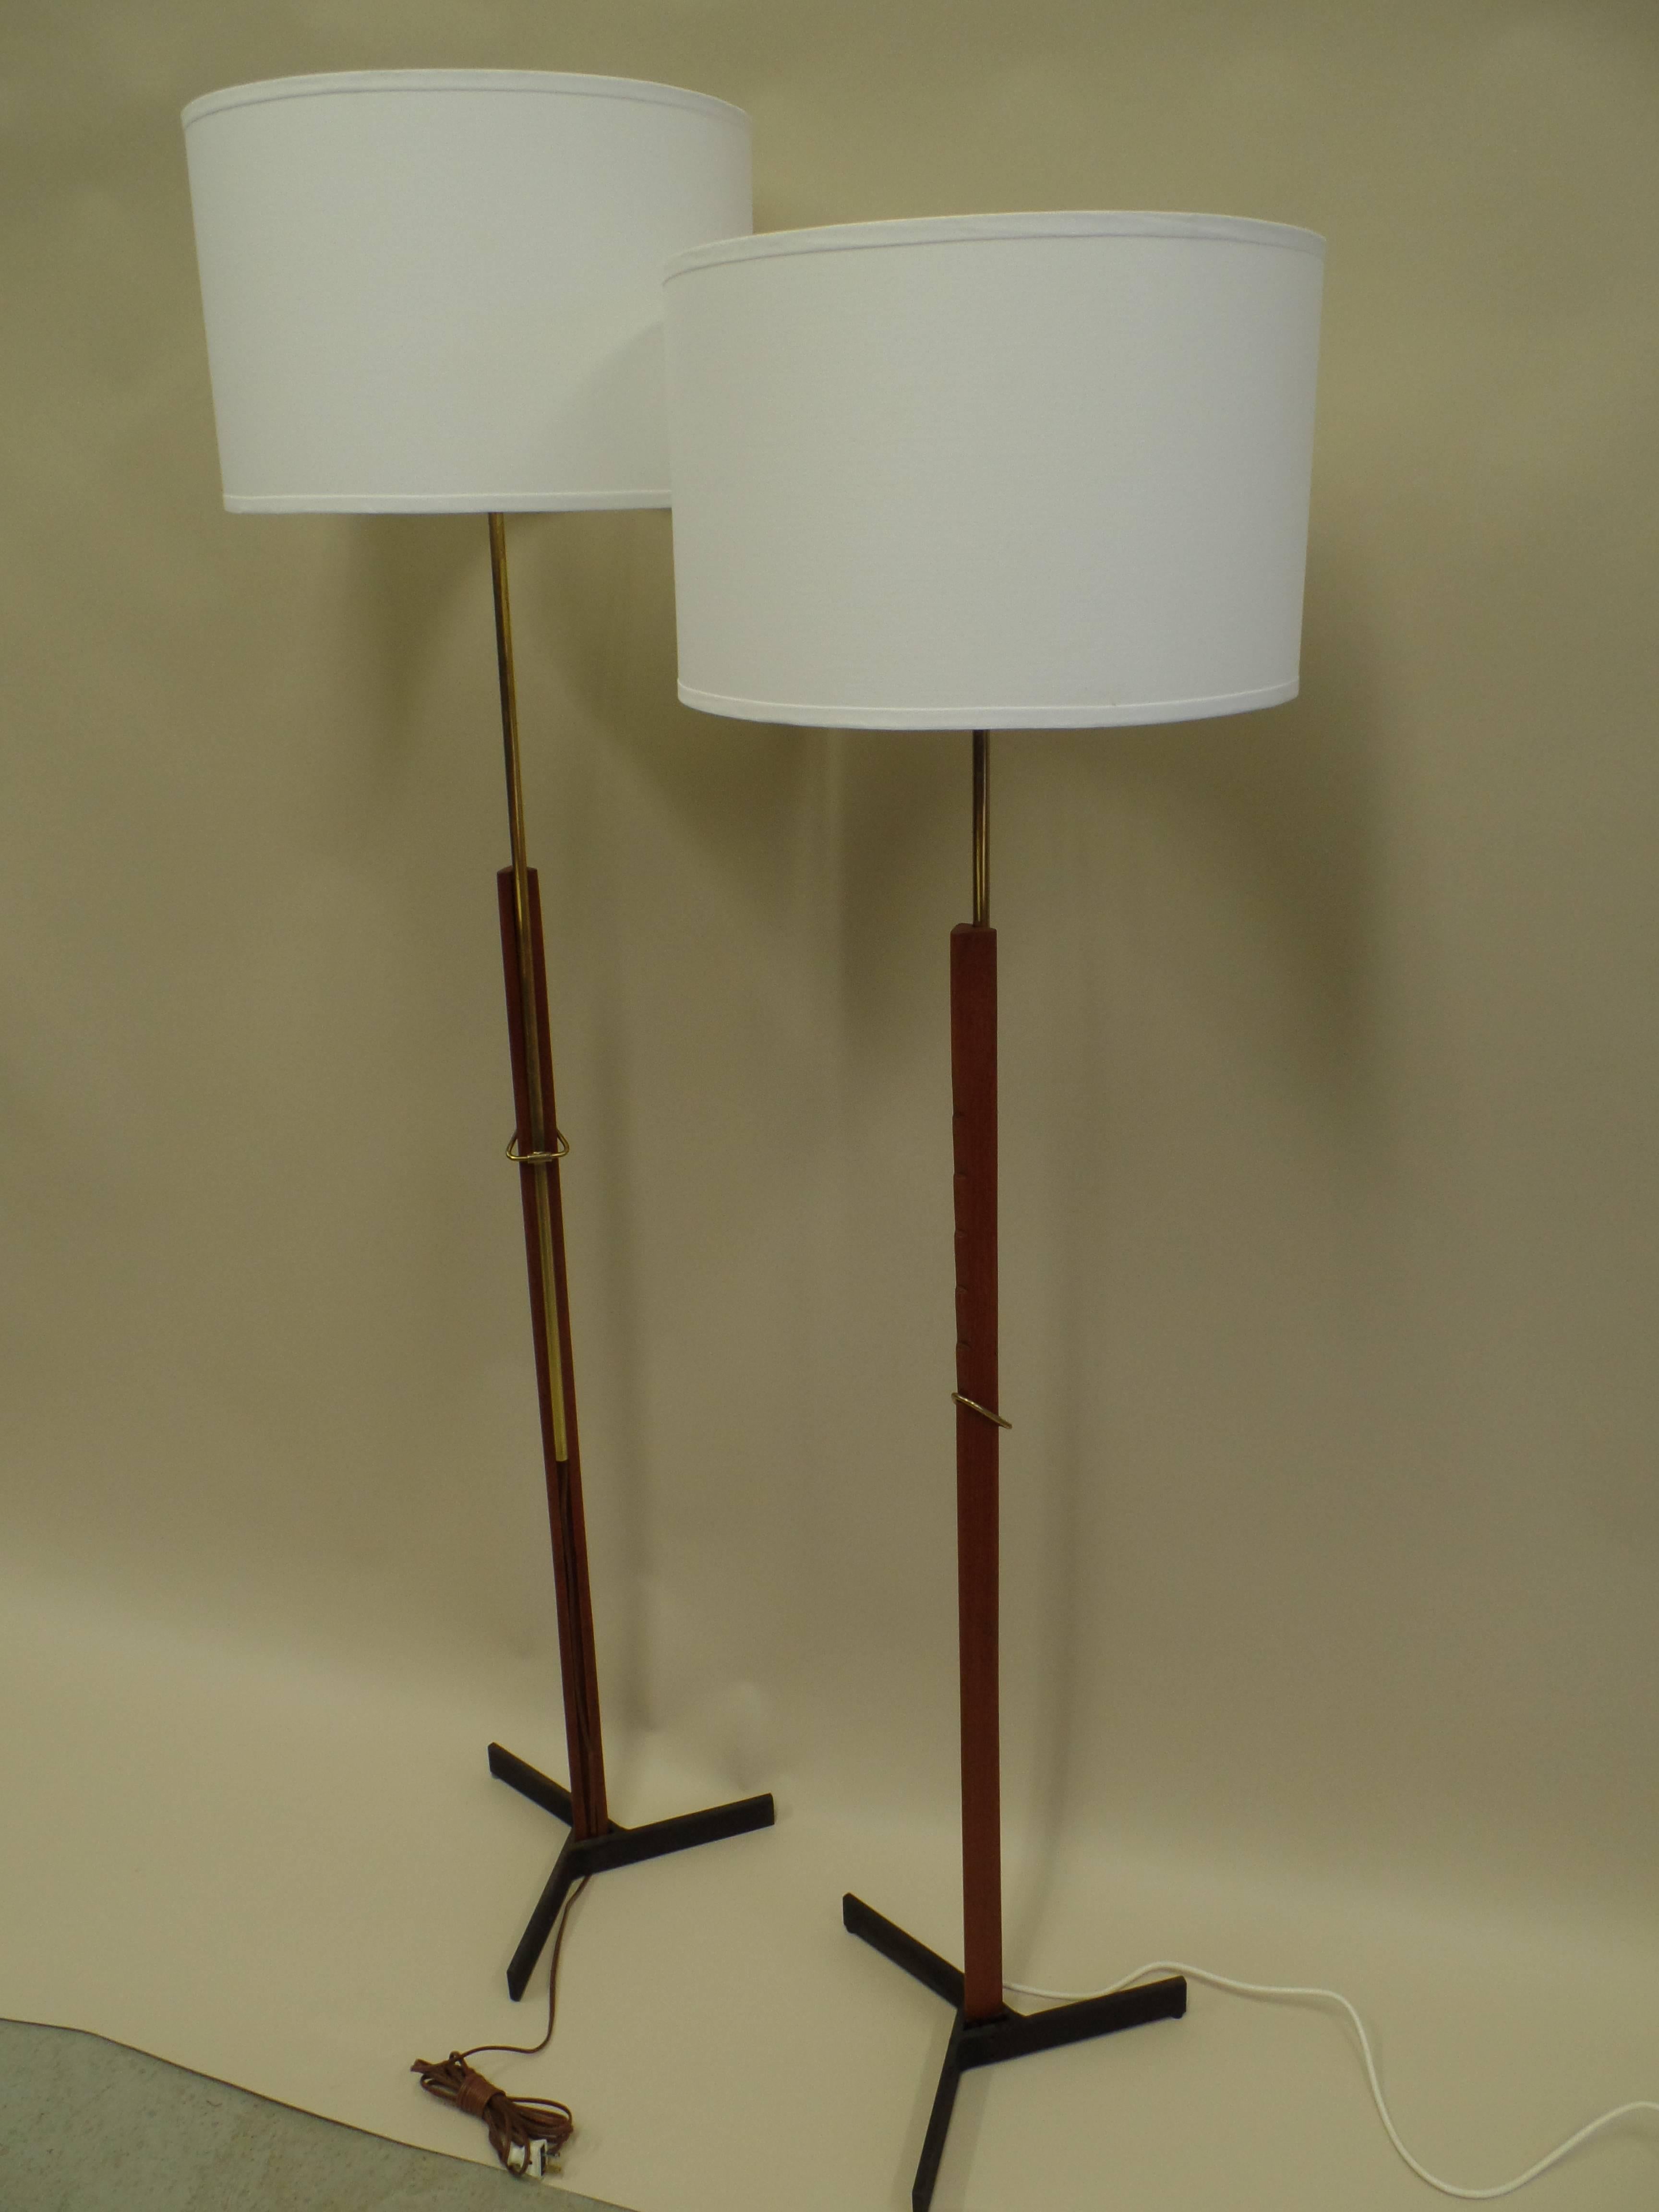 A rare and exquisite pair of Scandinavian Modern standing lamps by Svend Aage Holm Sorensen conveying the beauty and functional efficiency of Scandinavian design. These pieces are engineered with a unique adjustable stem system and designed with a